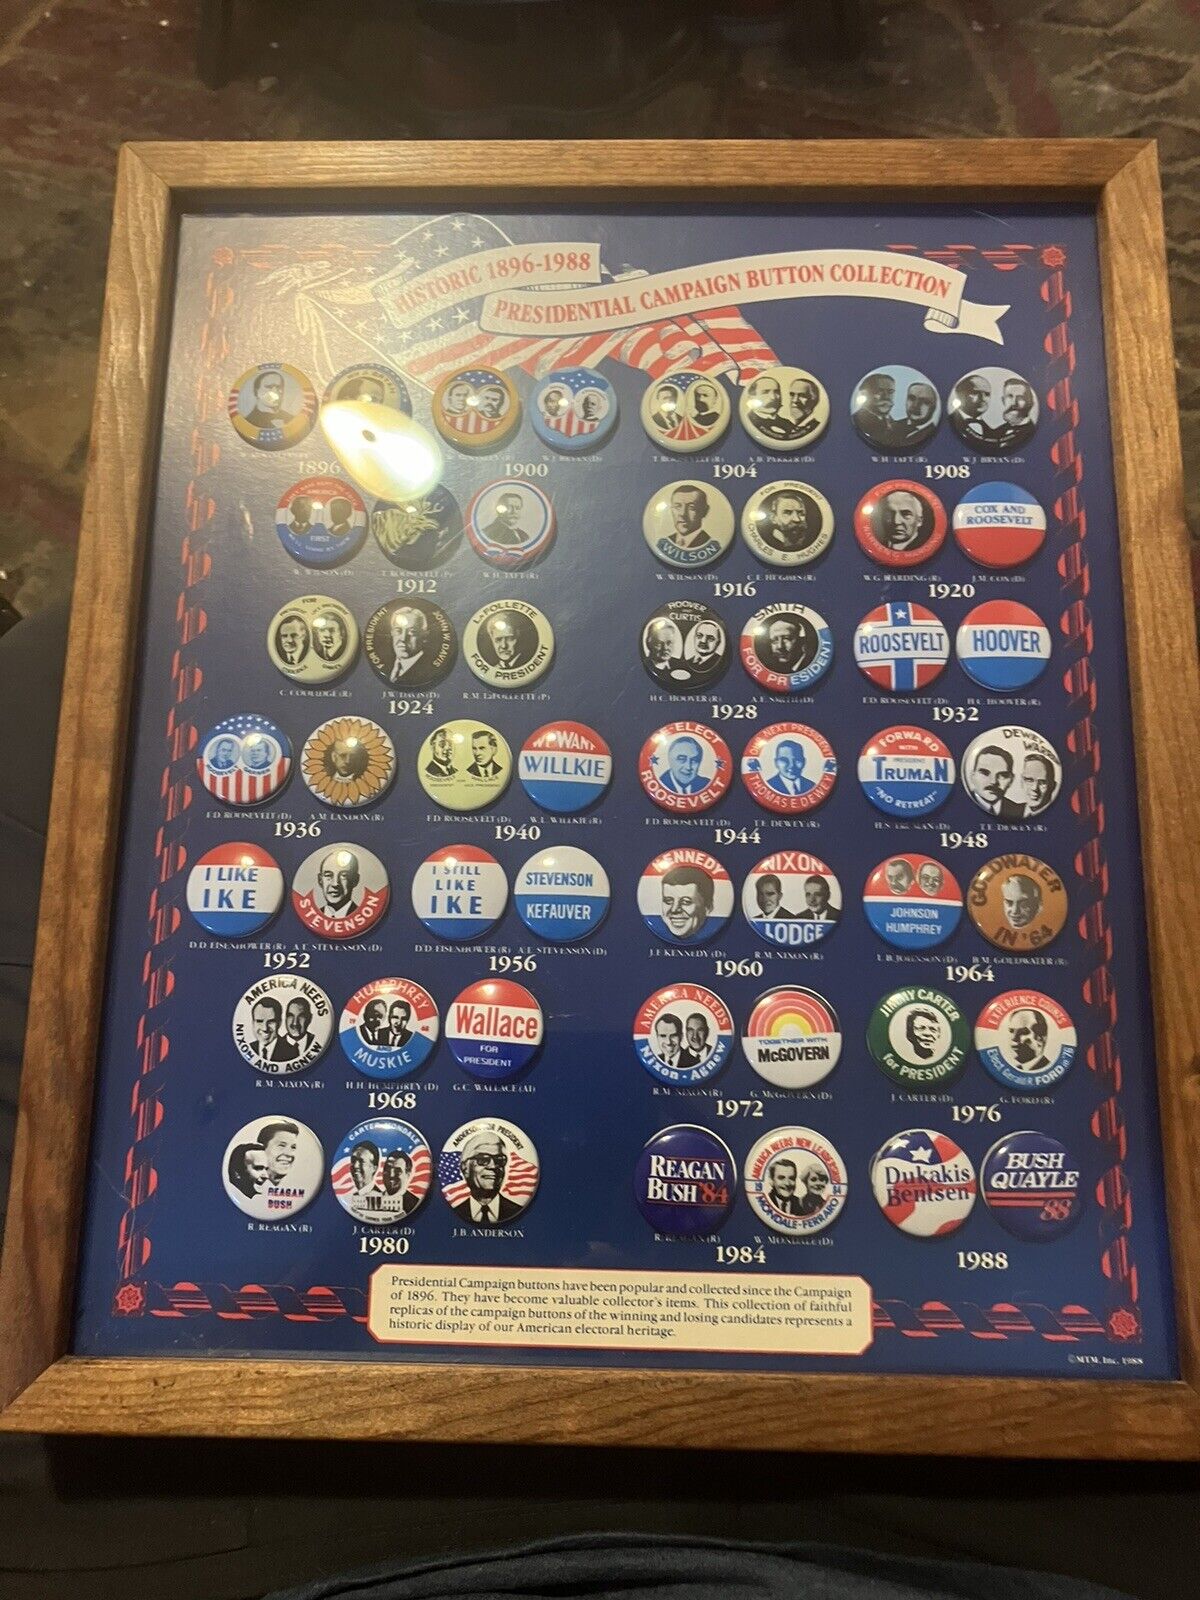 Framed Historic 1896-1988 Presidential Campaign Button Collection. Reproduction